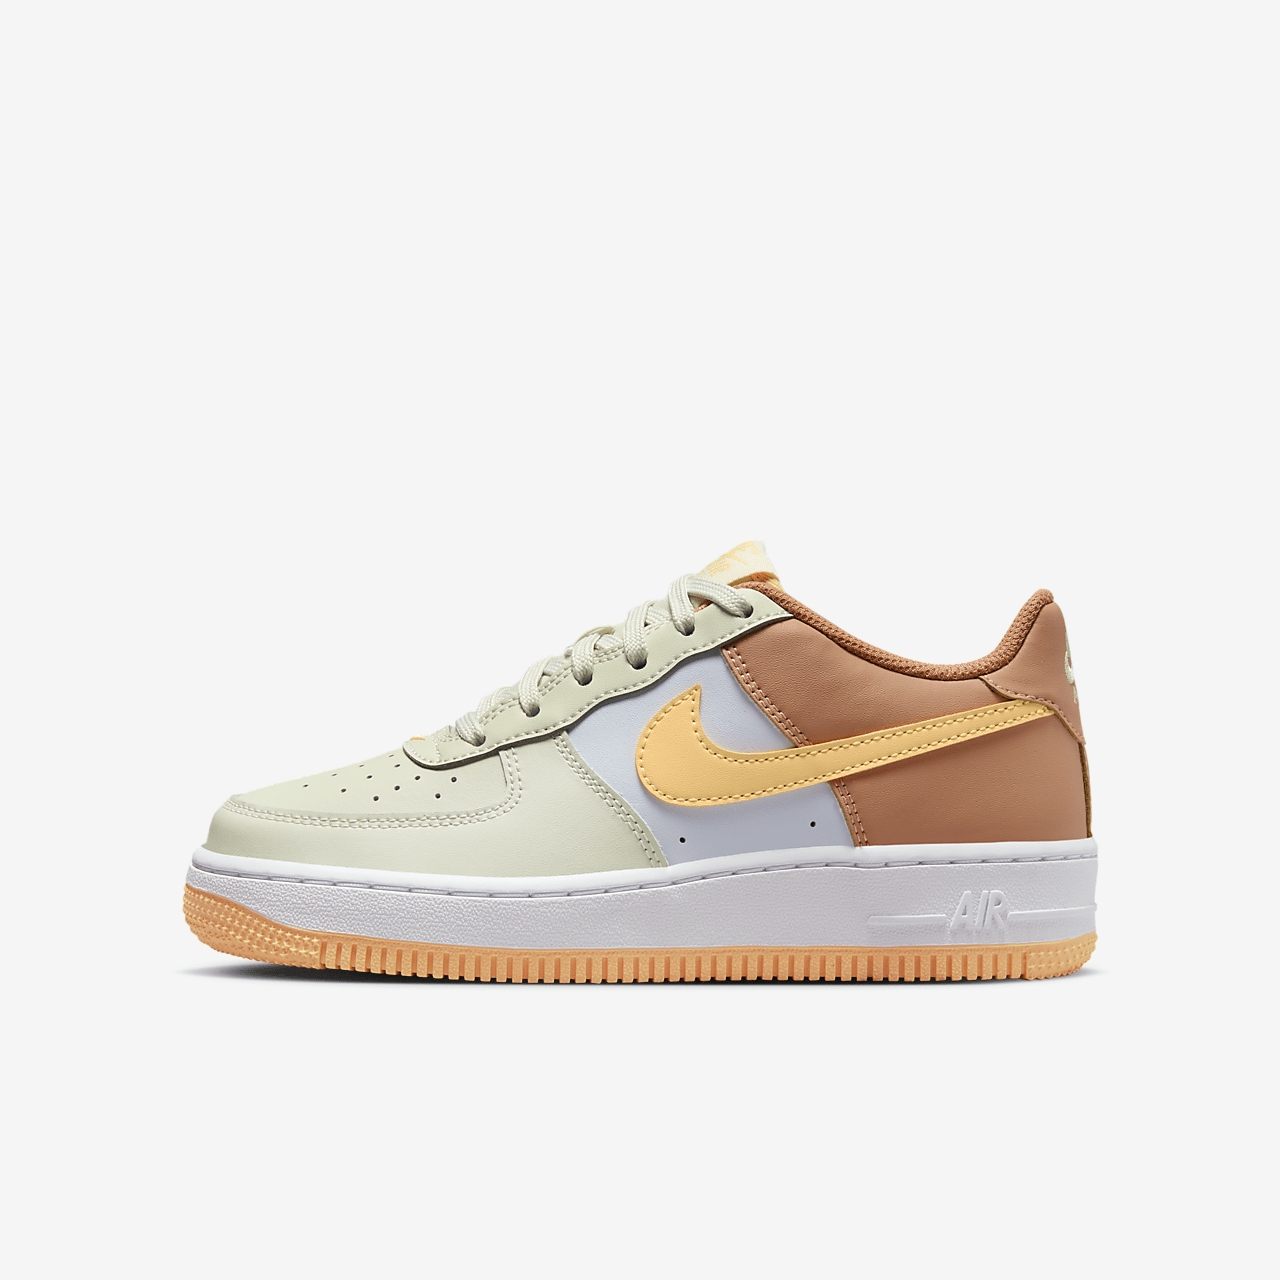 Nike Air Force 1 GS 'Sea Glass Amber Brown Melon Tint' CT3839-006